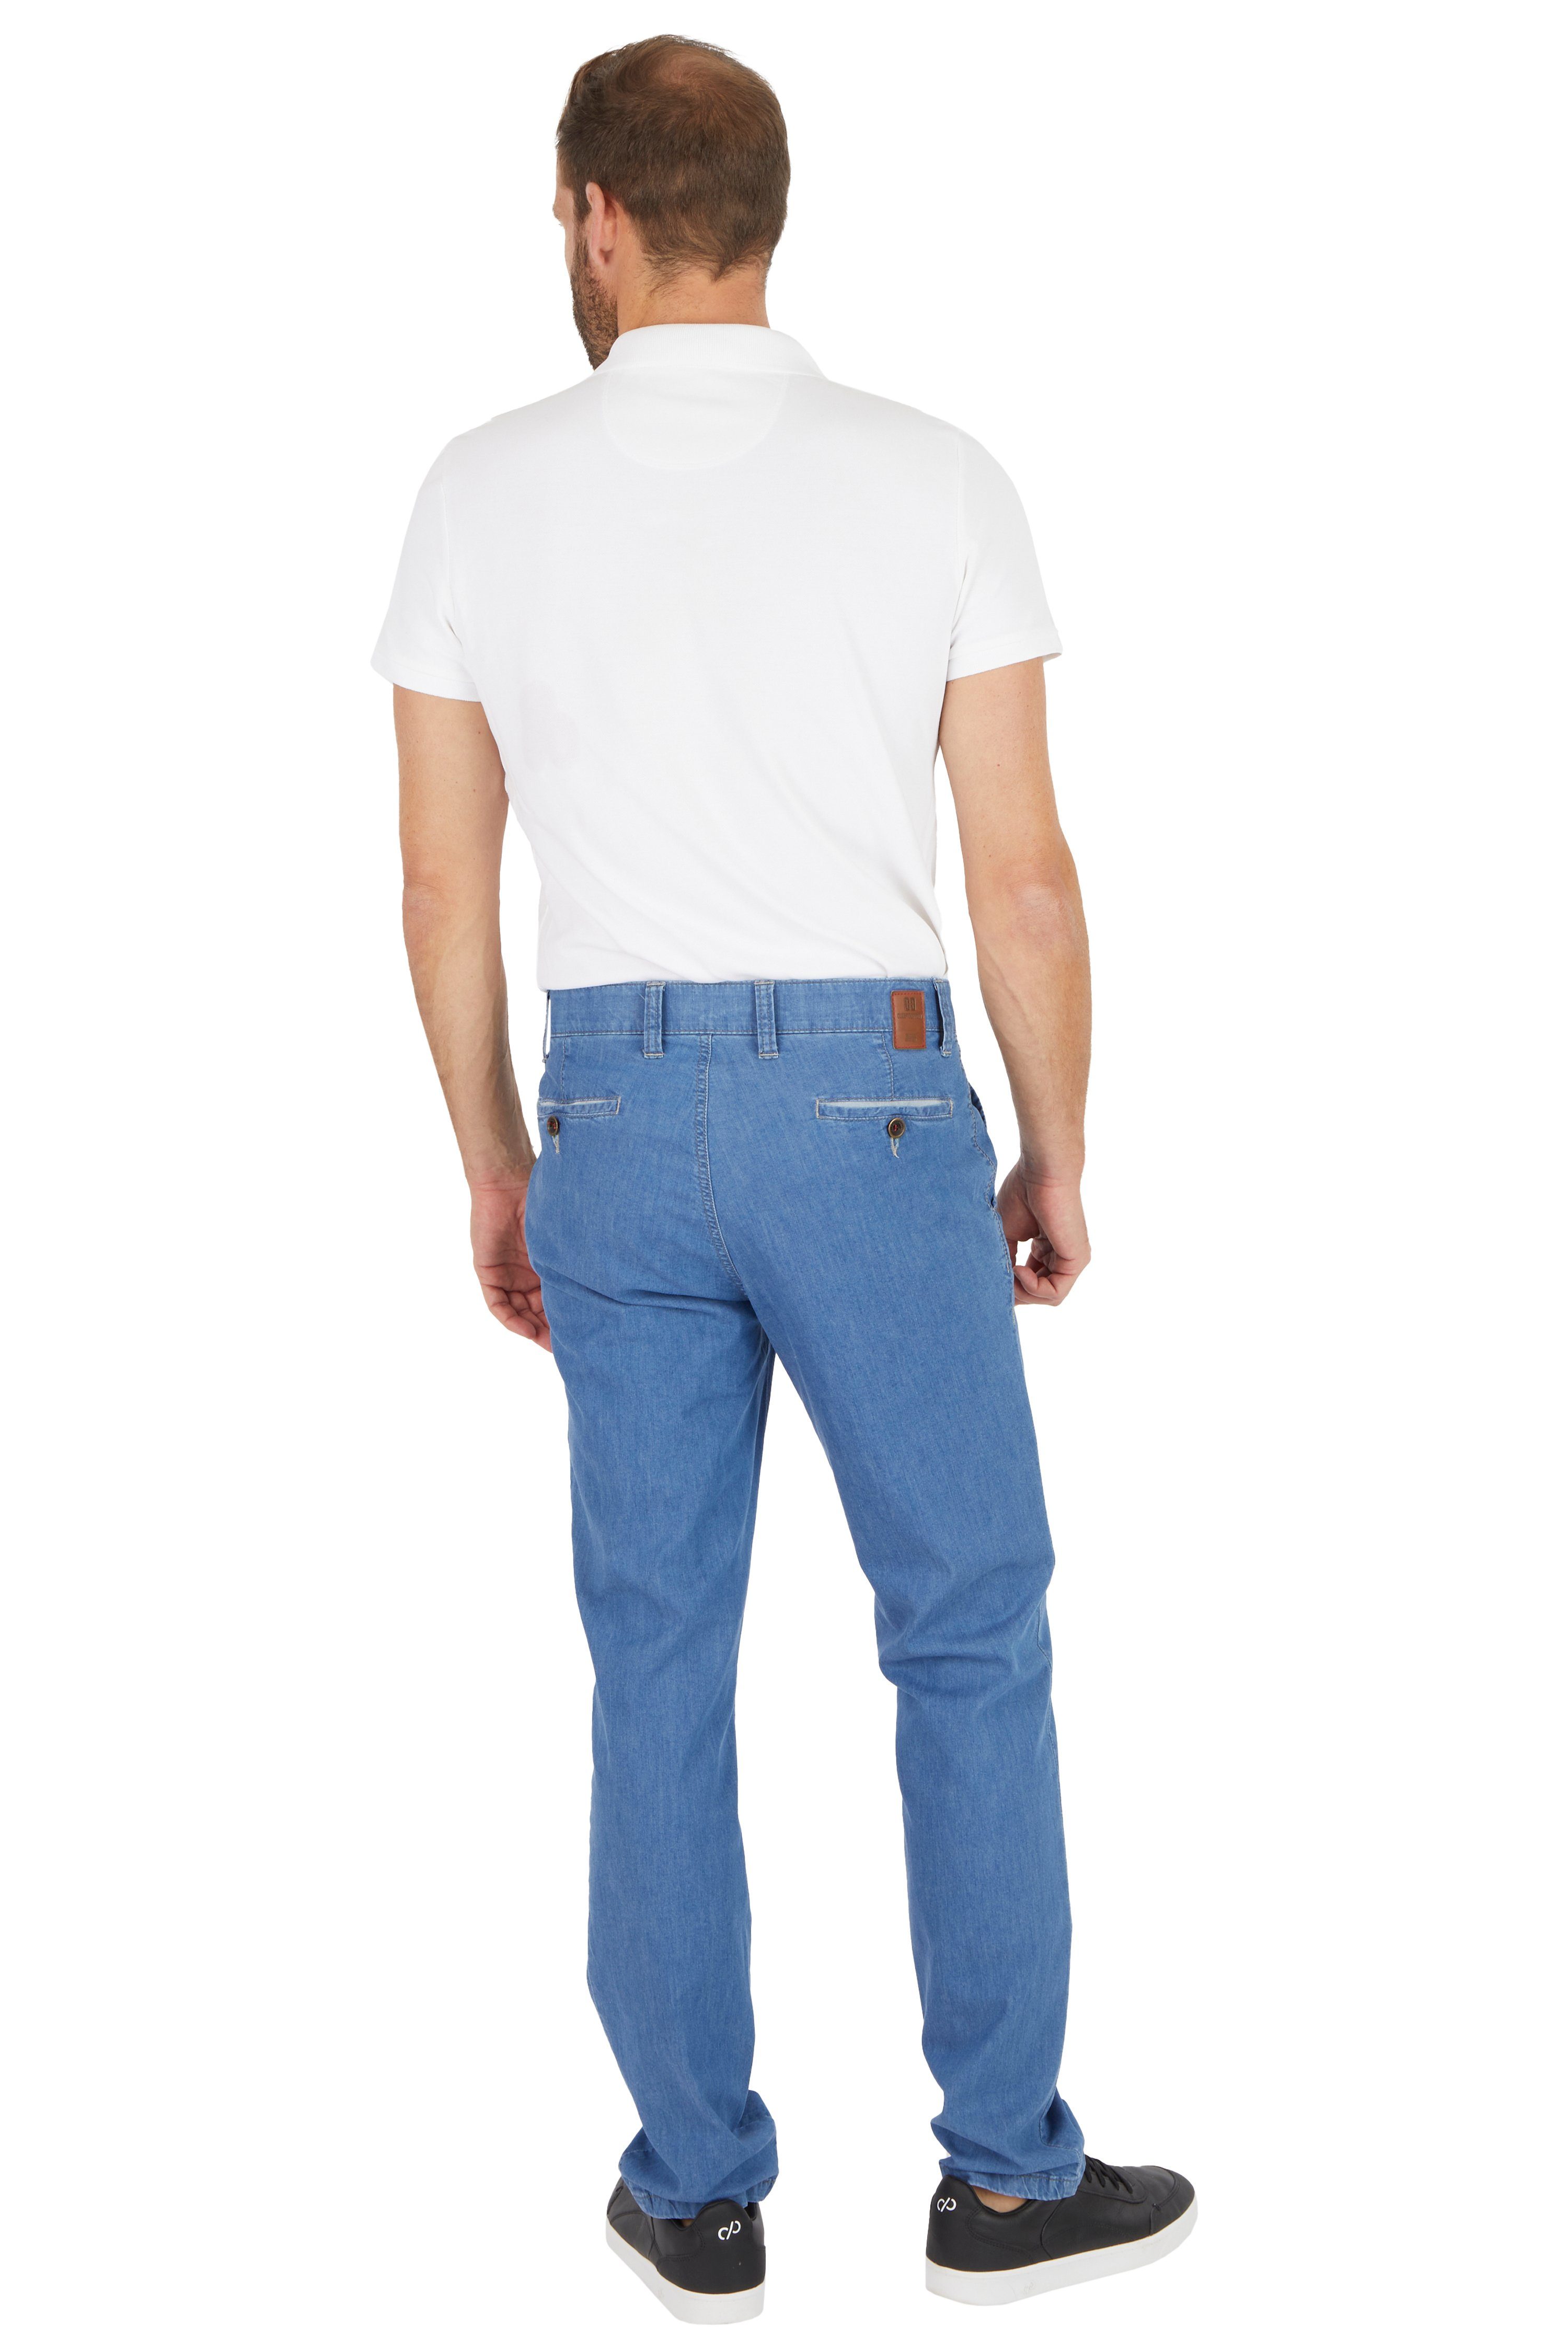 of Bequeme Jeans Club Comfort